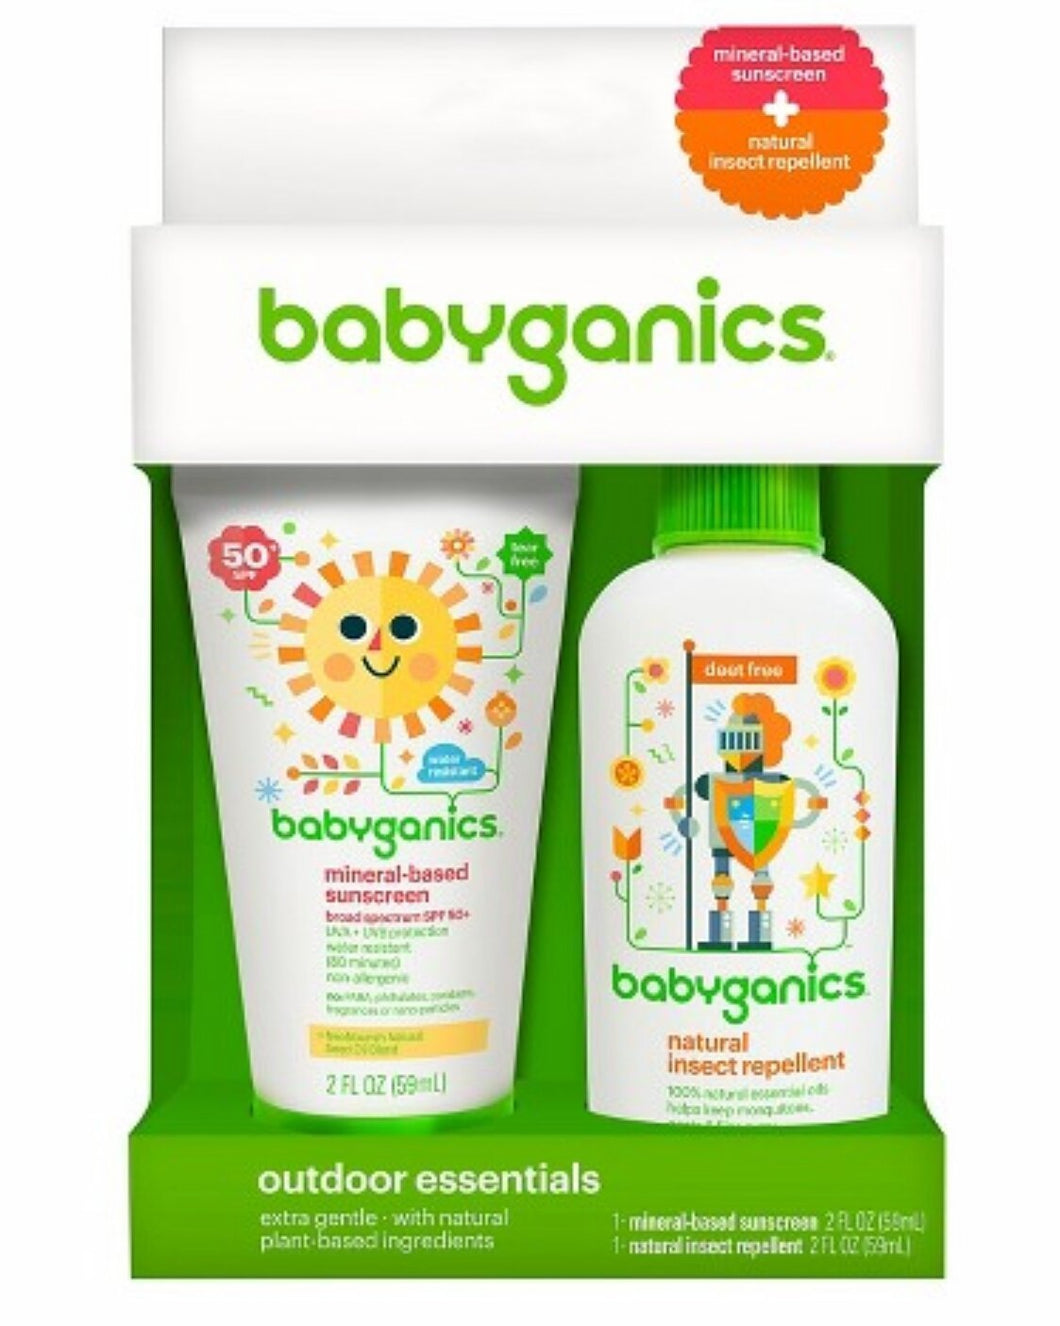 Babyganics Mineral-Based SPF 50+ Sunscreen, 2 Ounce + Natural Insect Repellent, 2 Ounce Outdoor Essentials Duo